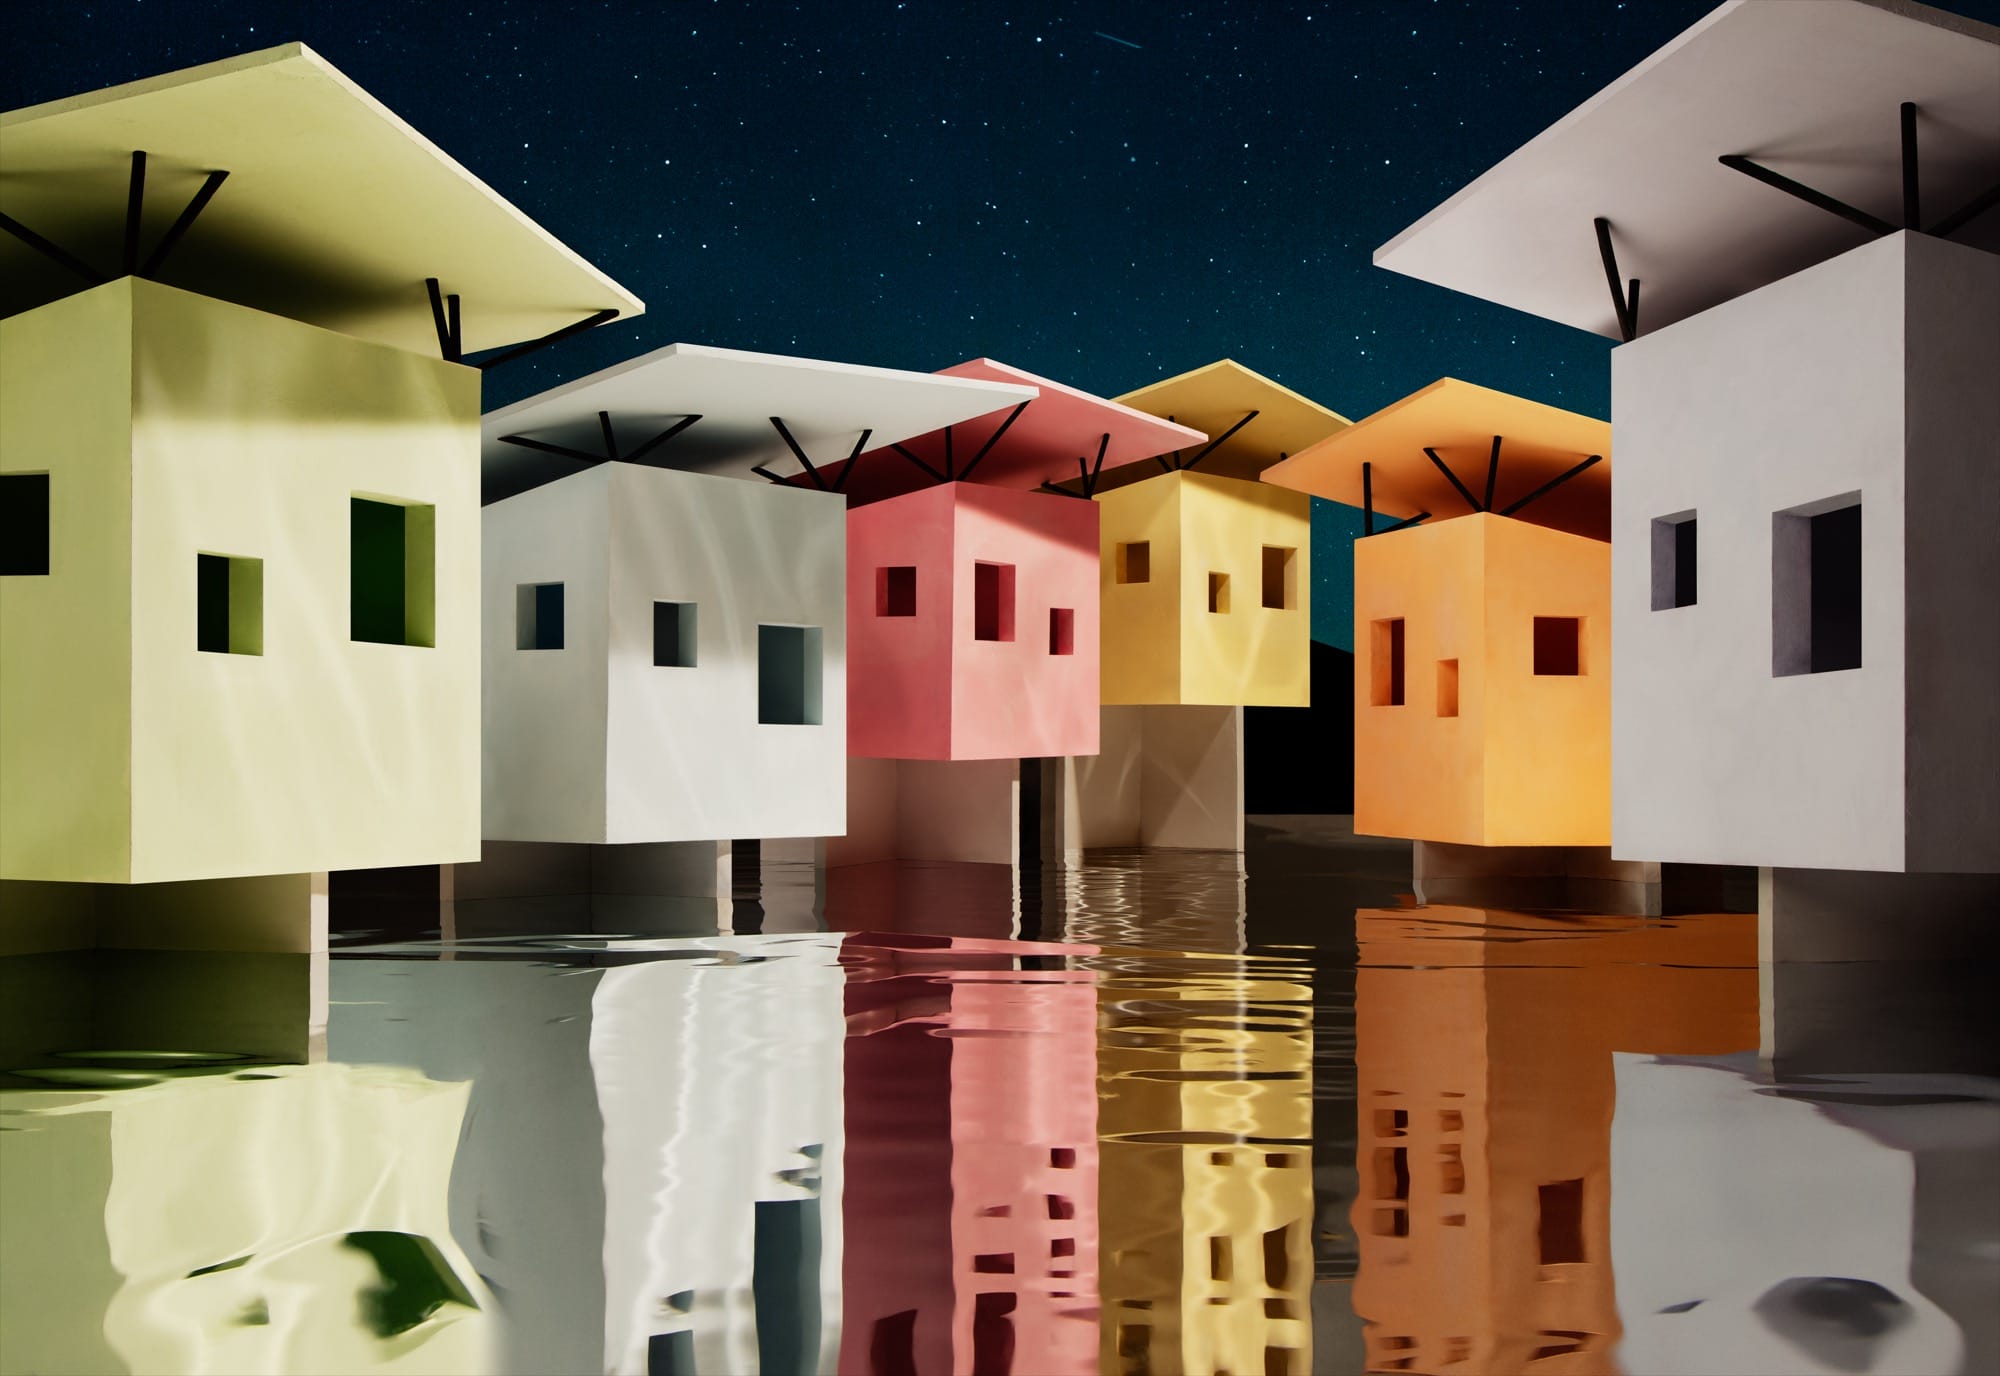 water rises around candy-colored architectural models with a starry sky